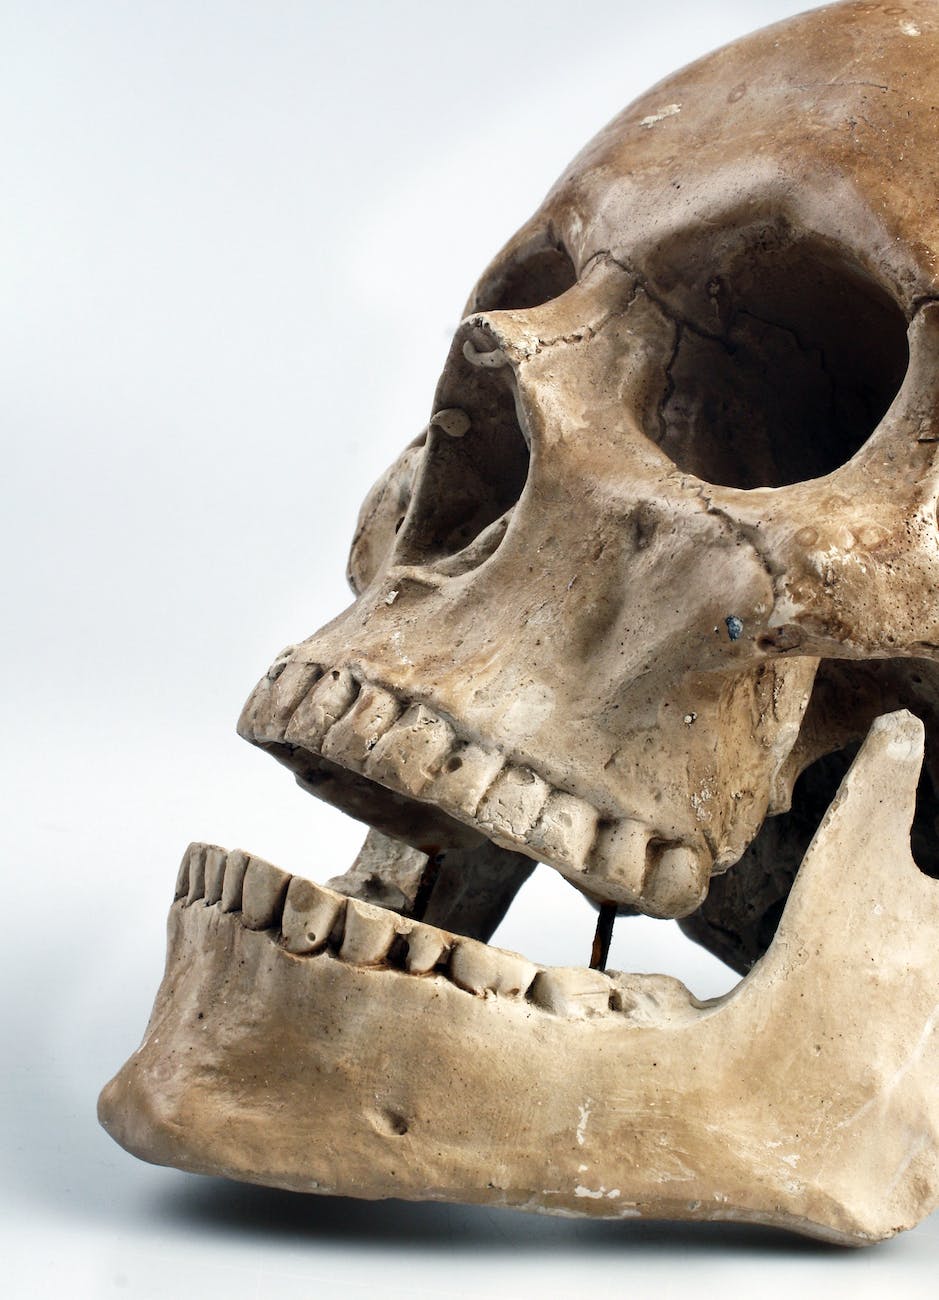 DNA study reveals modern humans emerged from several groups in Africa, not one.